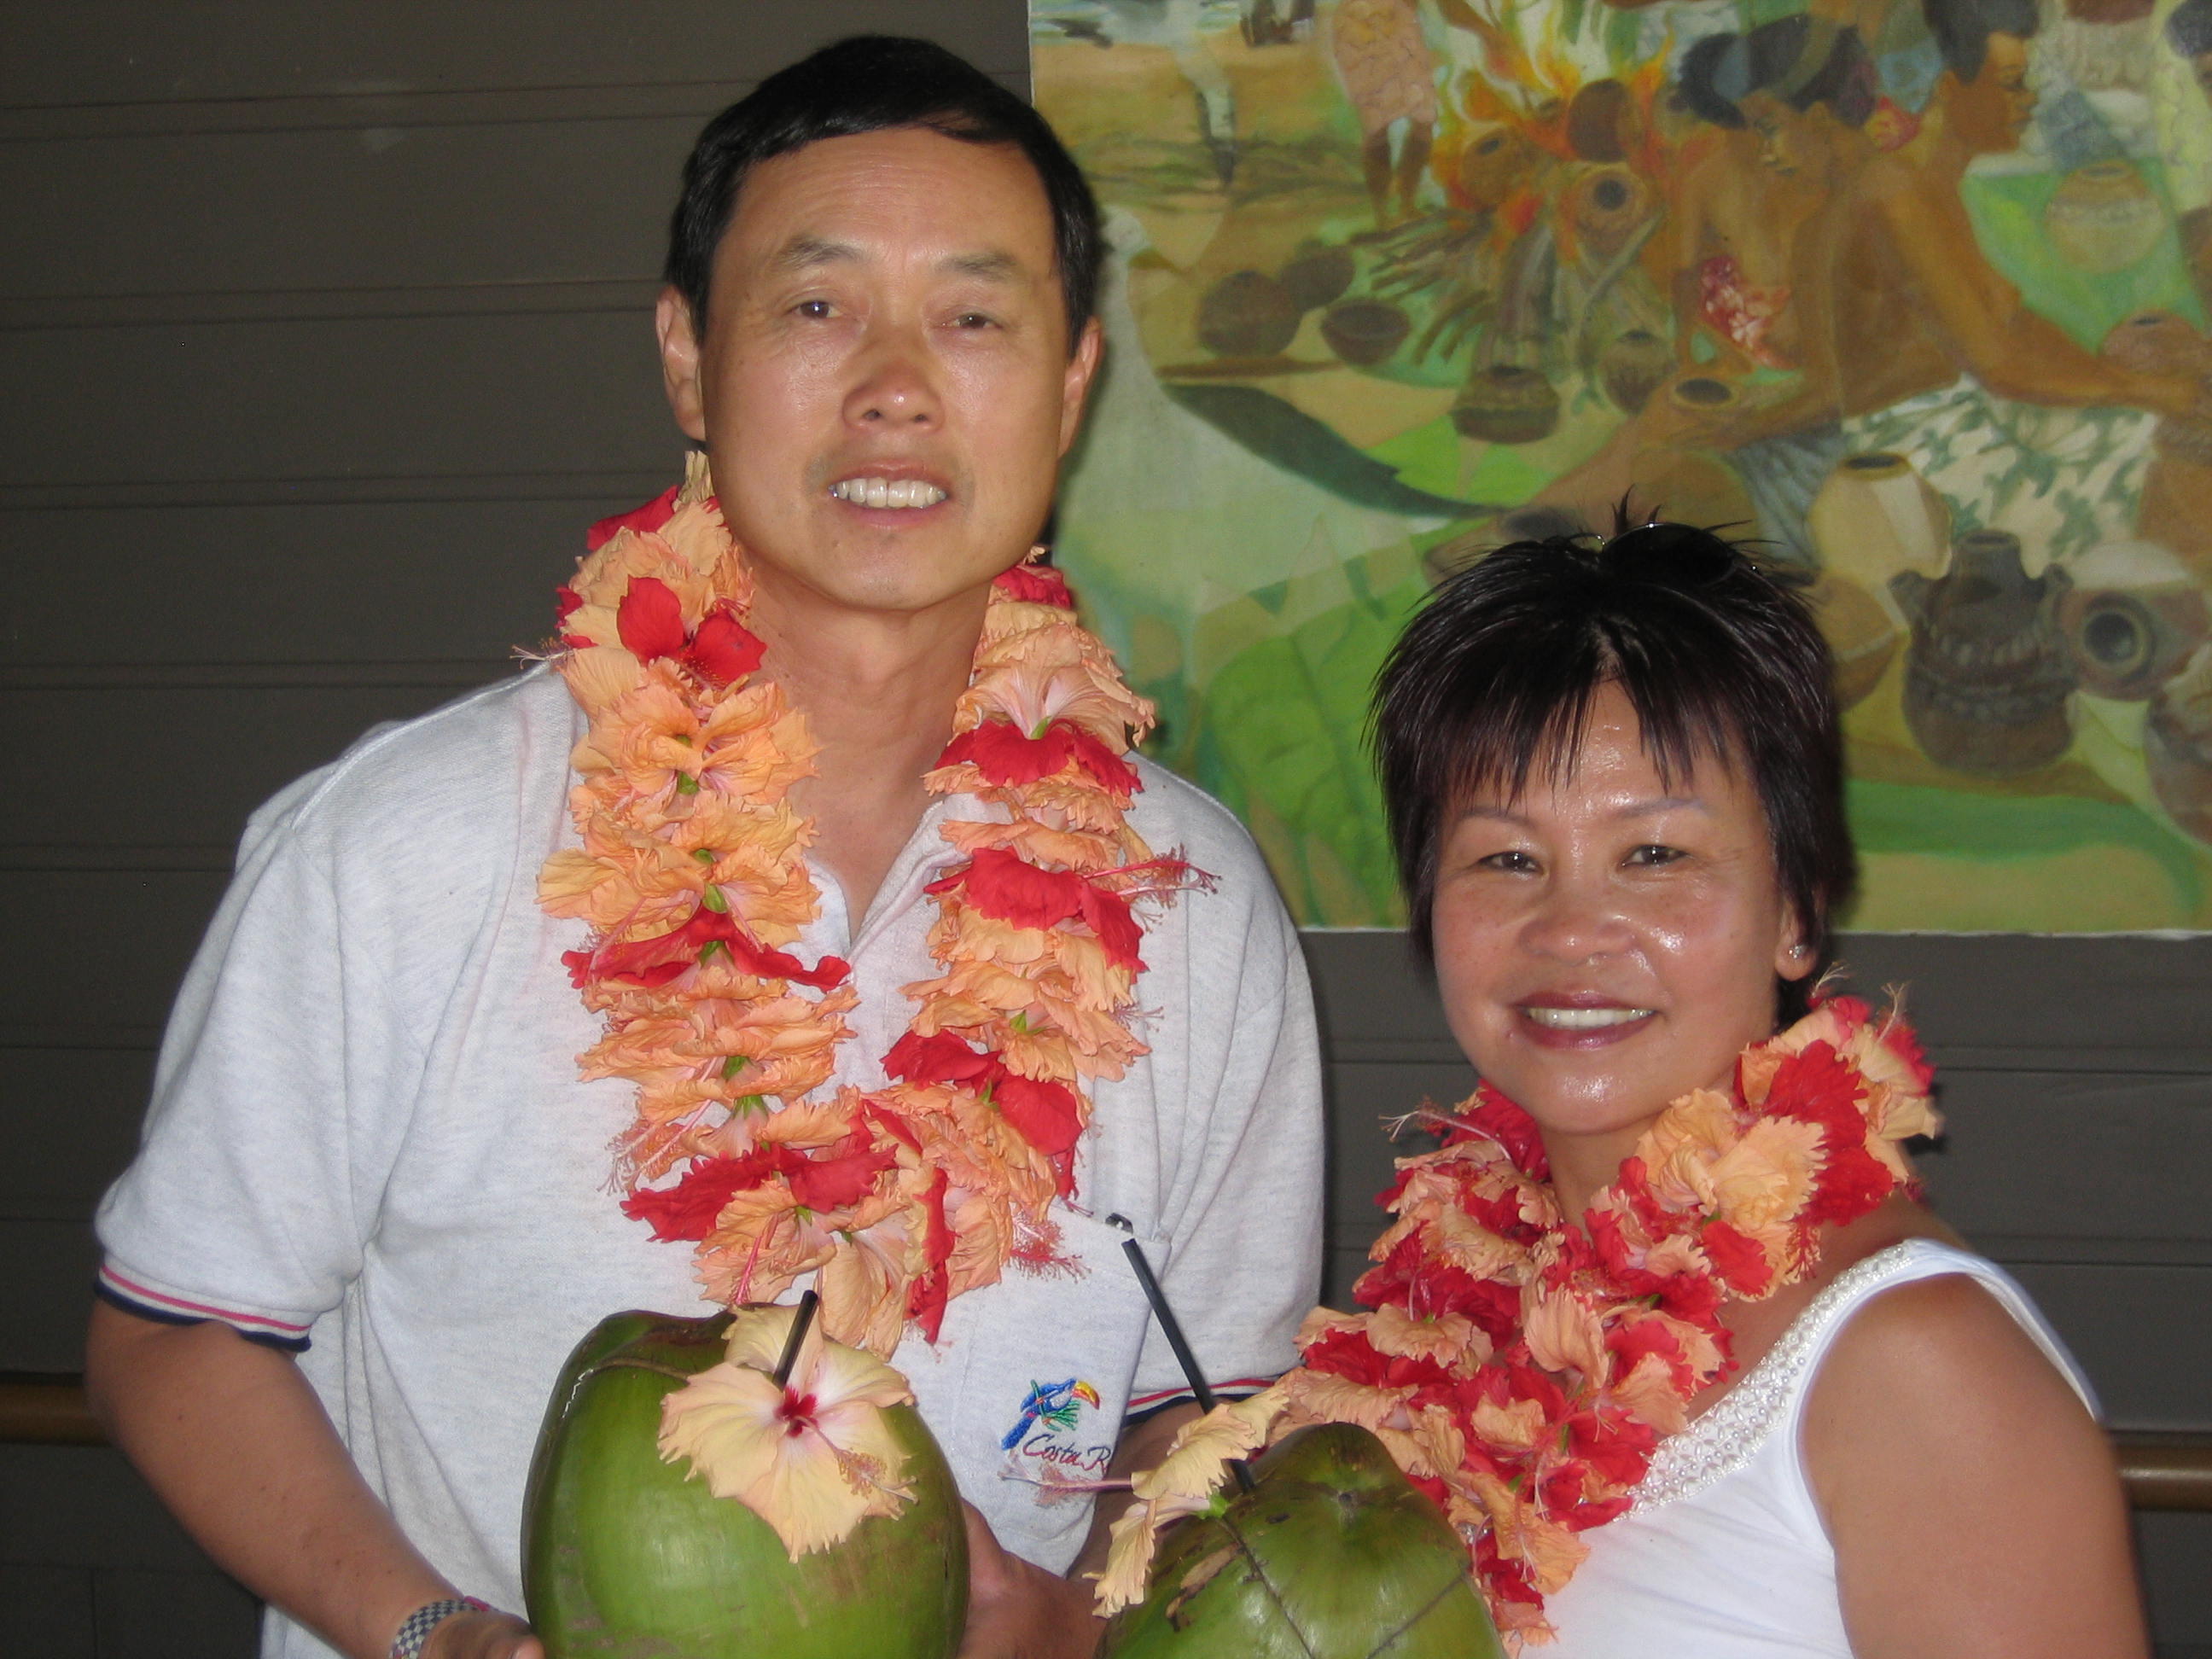 Ken and Lin are welcomed with cold refreshing coconut drink!